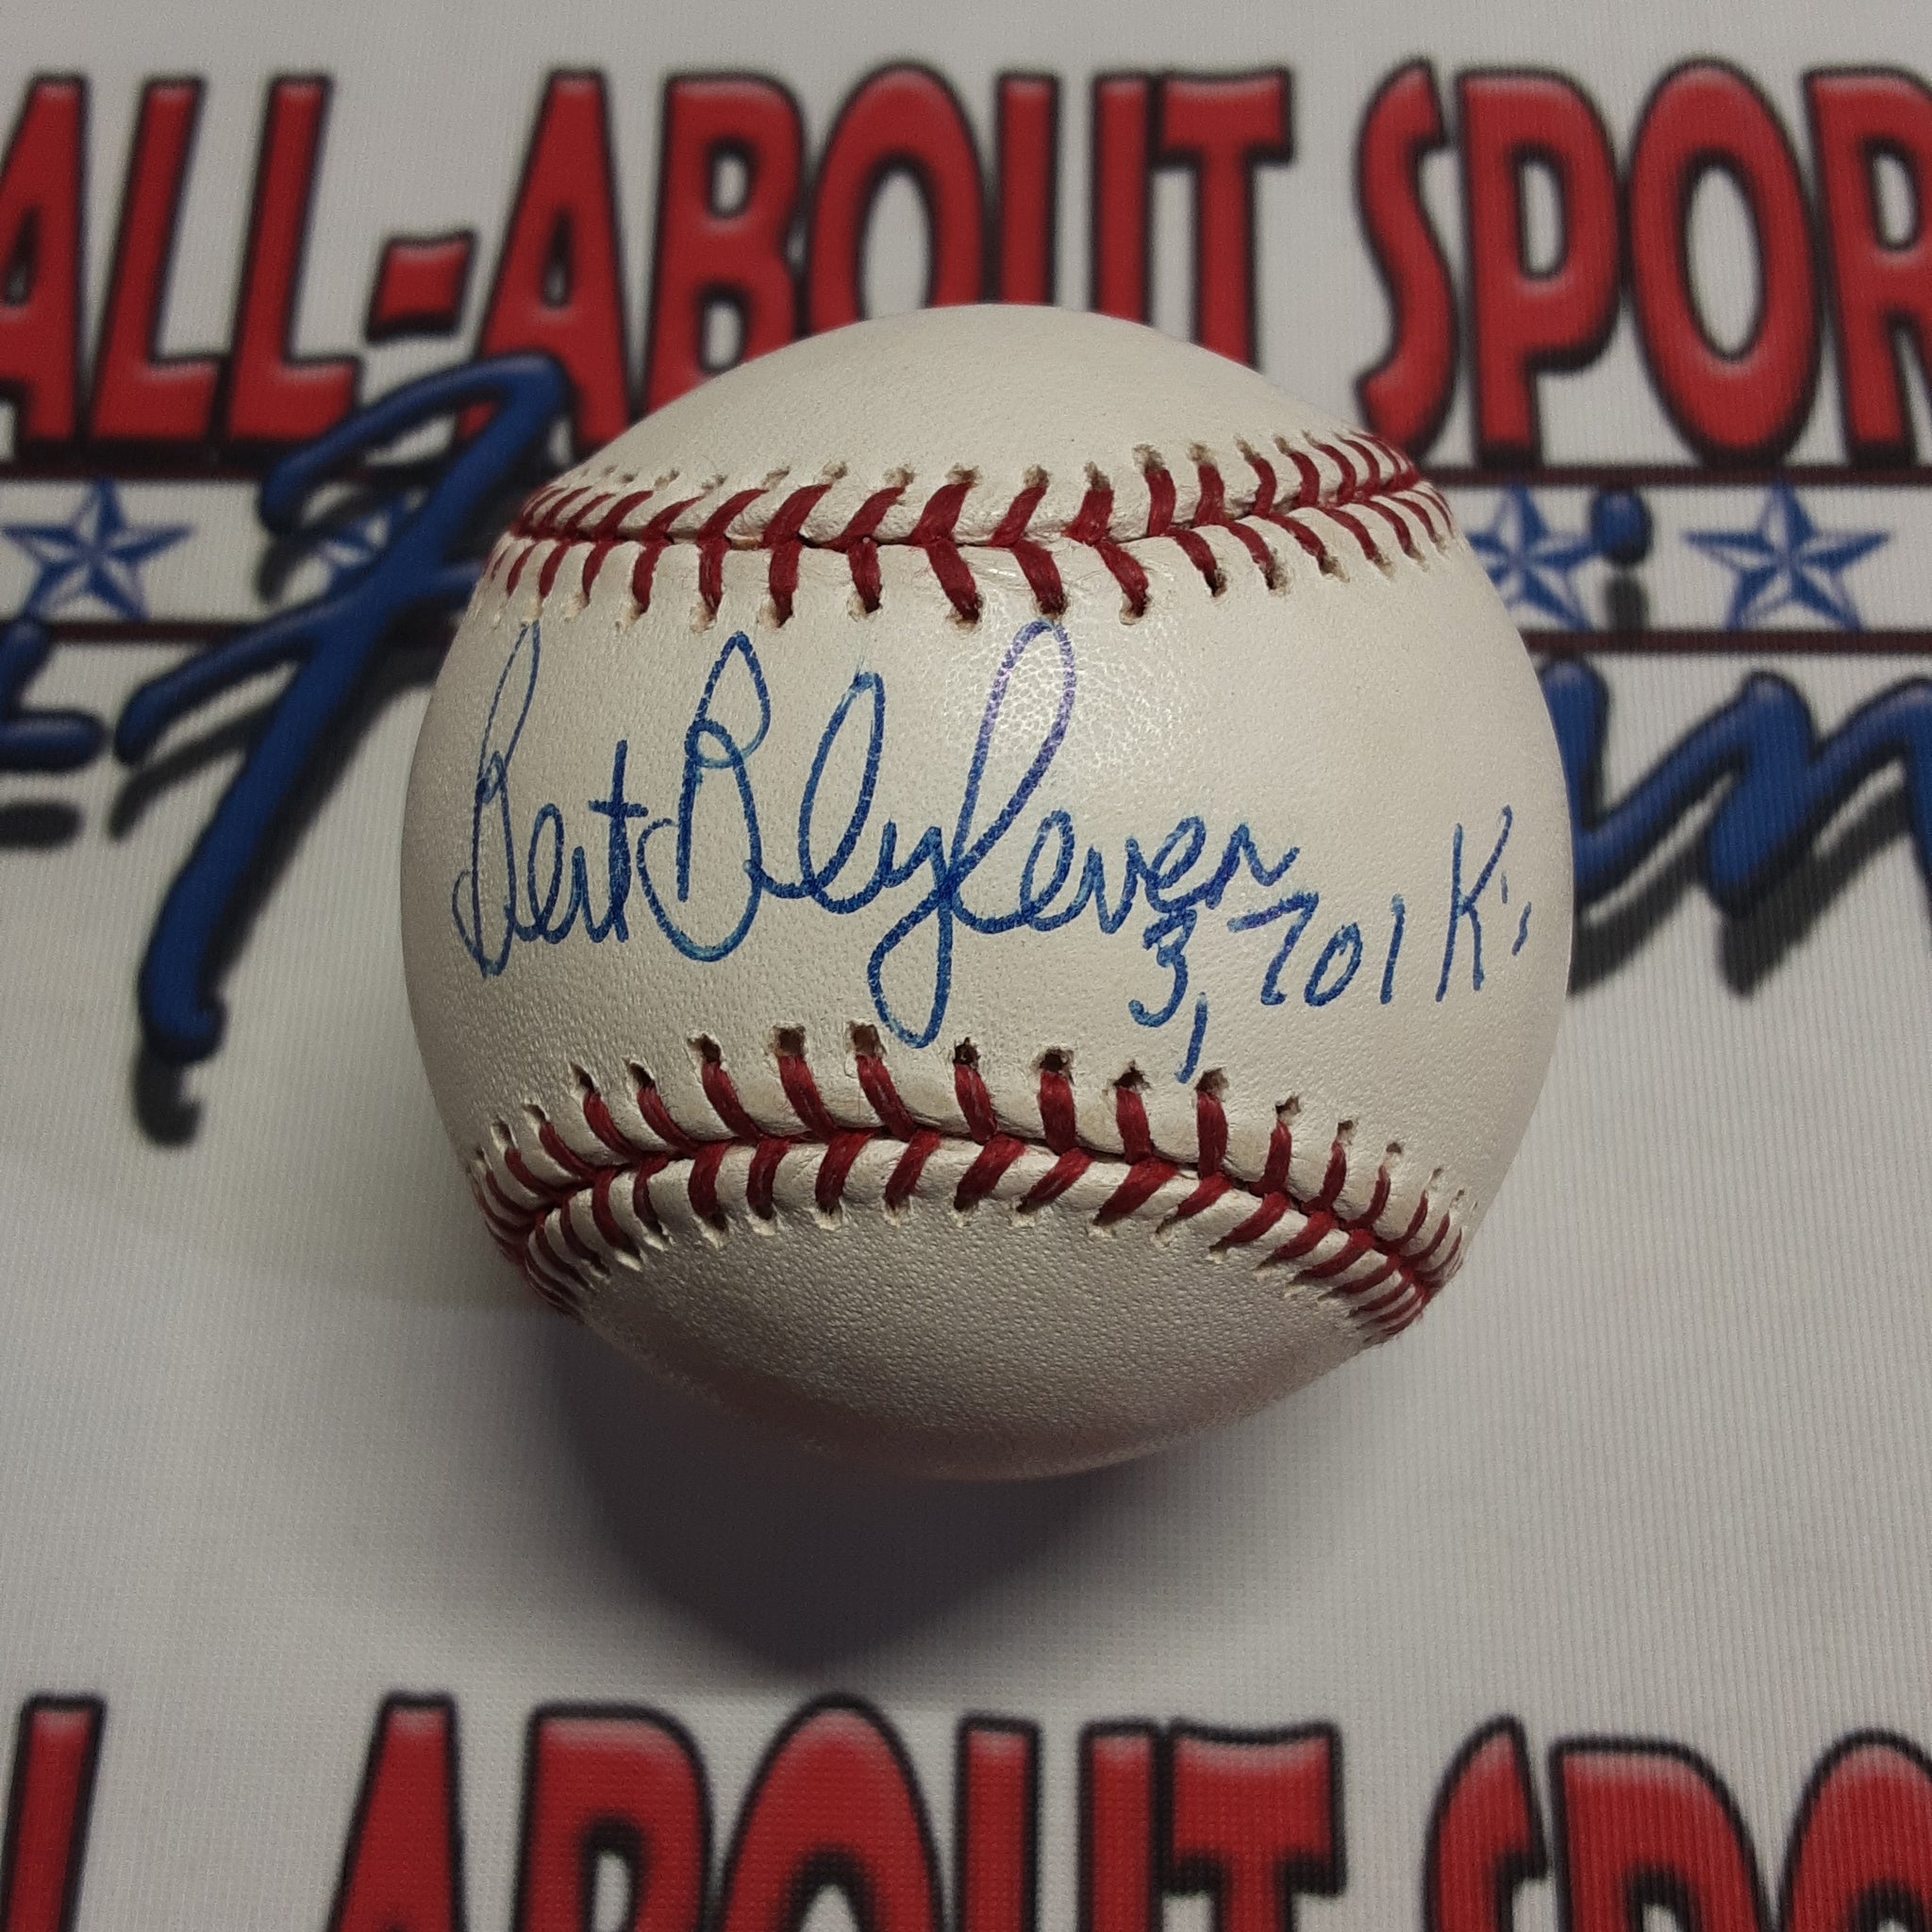 Bert Blyleven Authentic Signed Baseball Autographed with Inscription JSA.